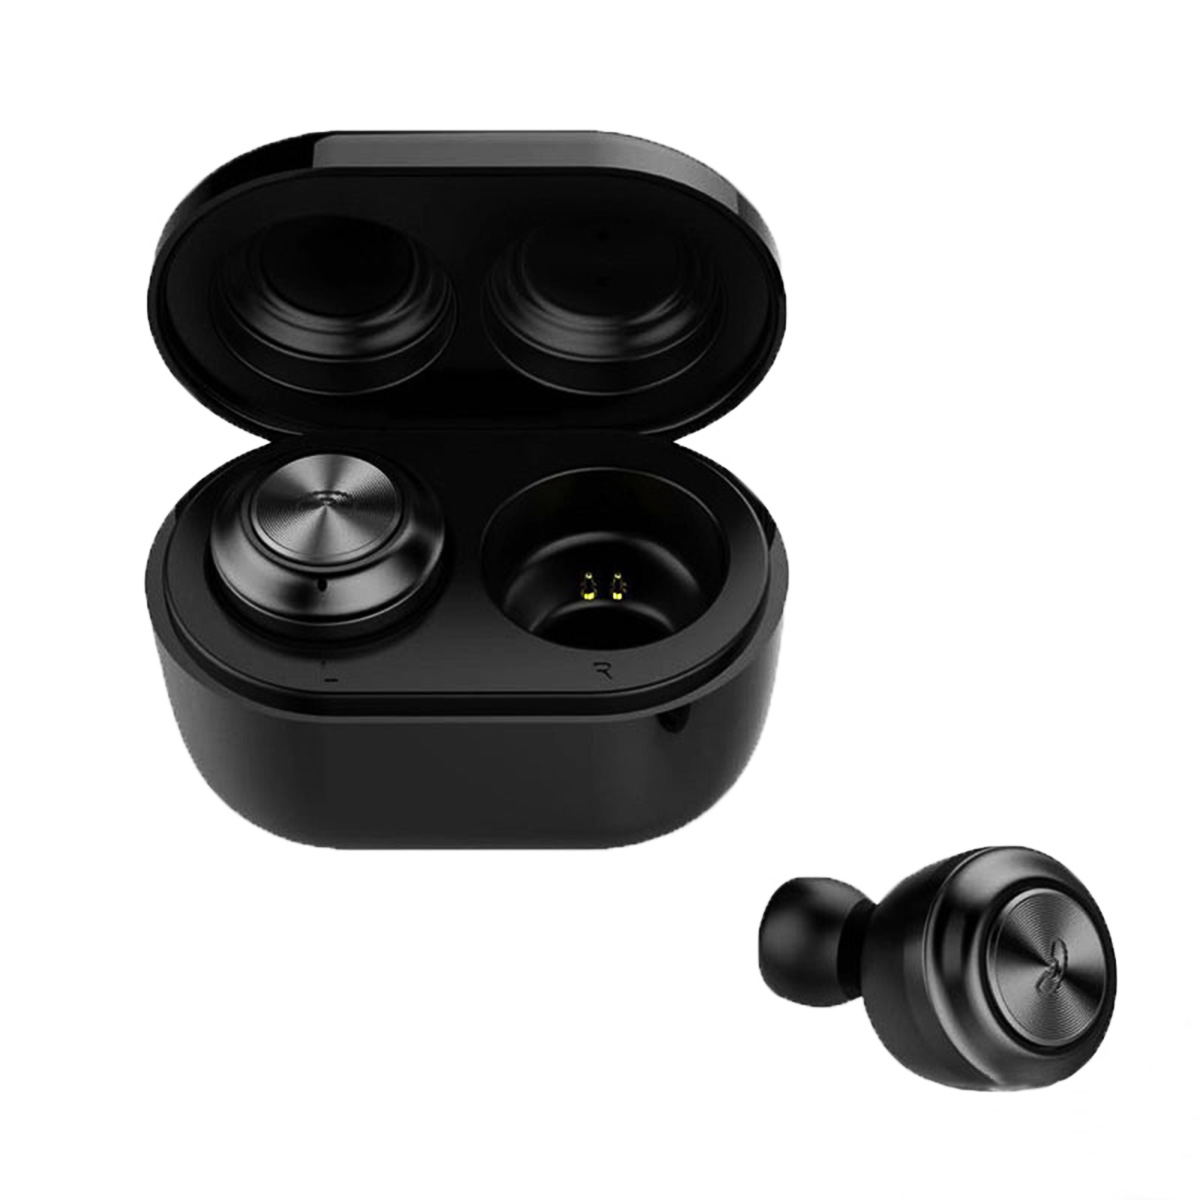 

[bluetooth 5.0] HiFi TWS True Wireless Earbuds CVC8.0 Noise Cancelling Stereo Earphone with Mic